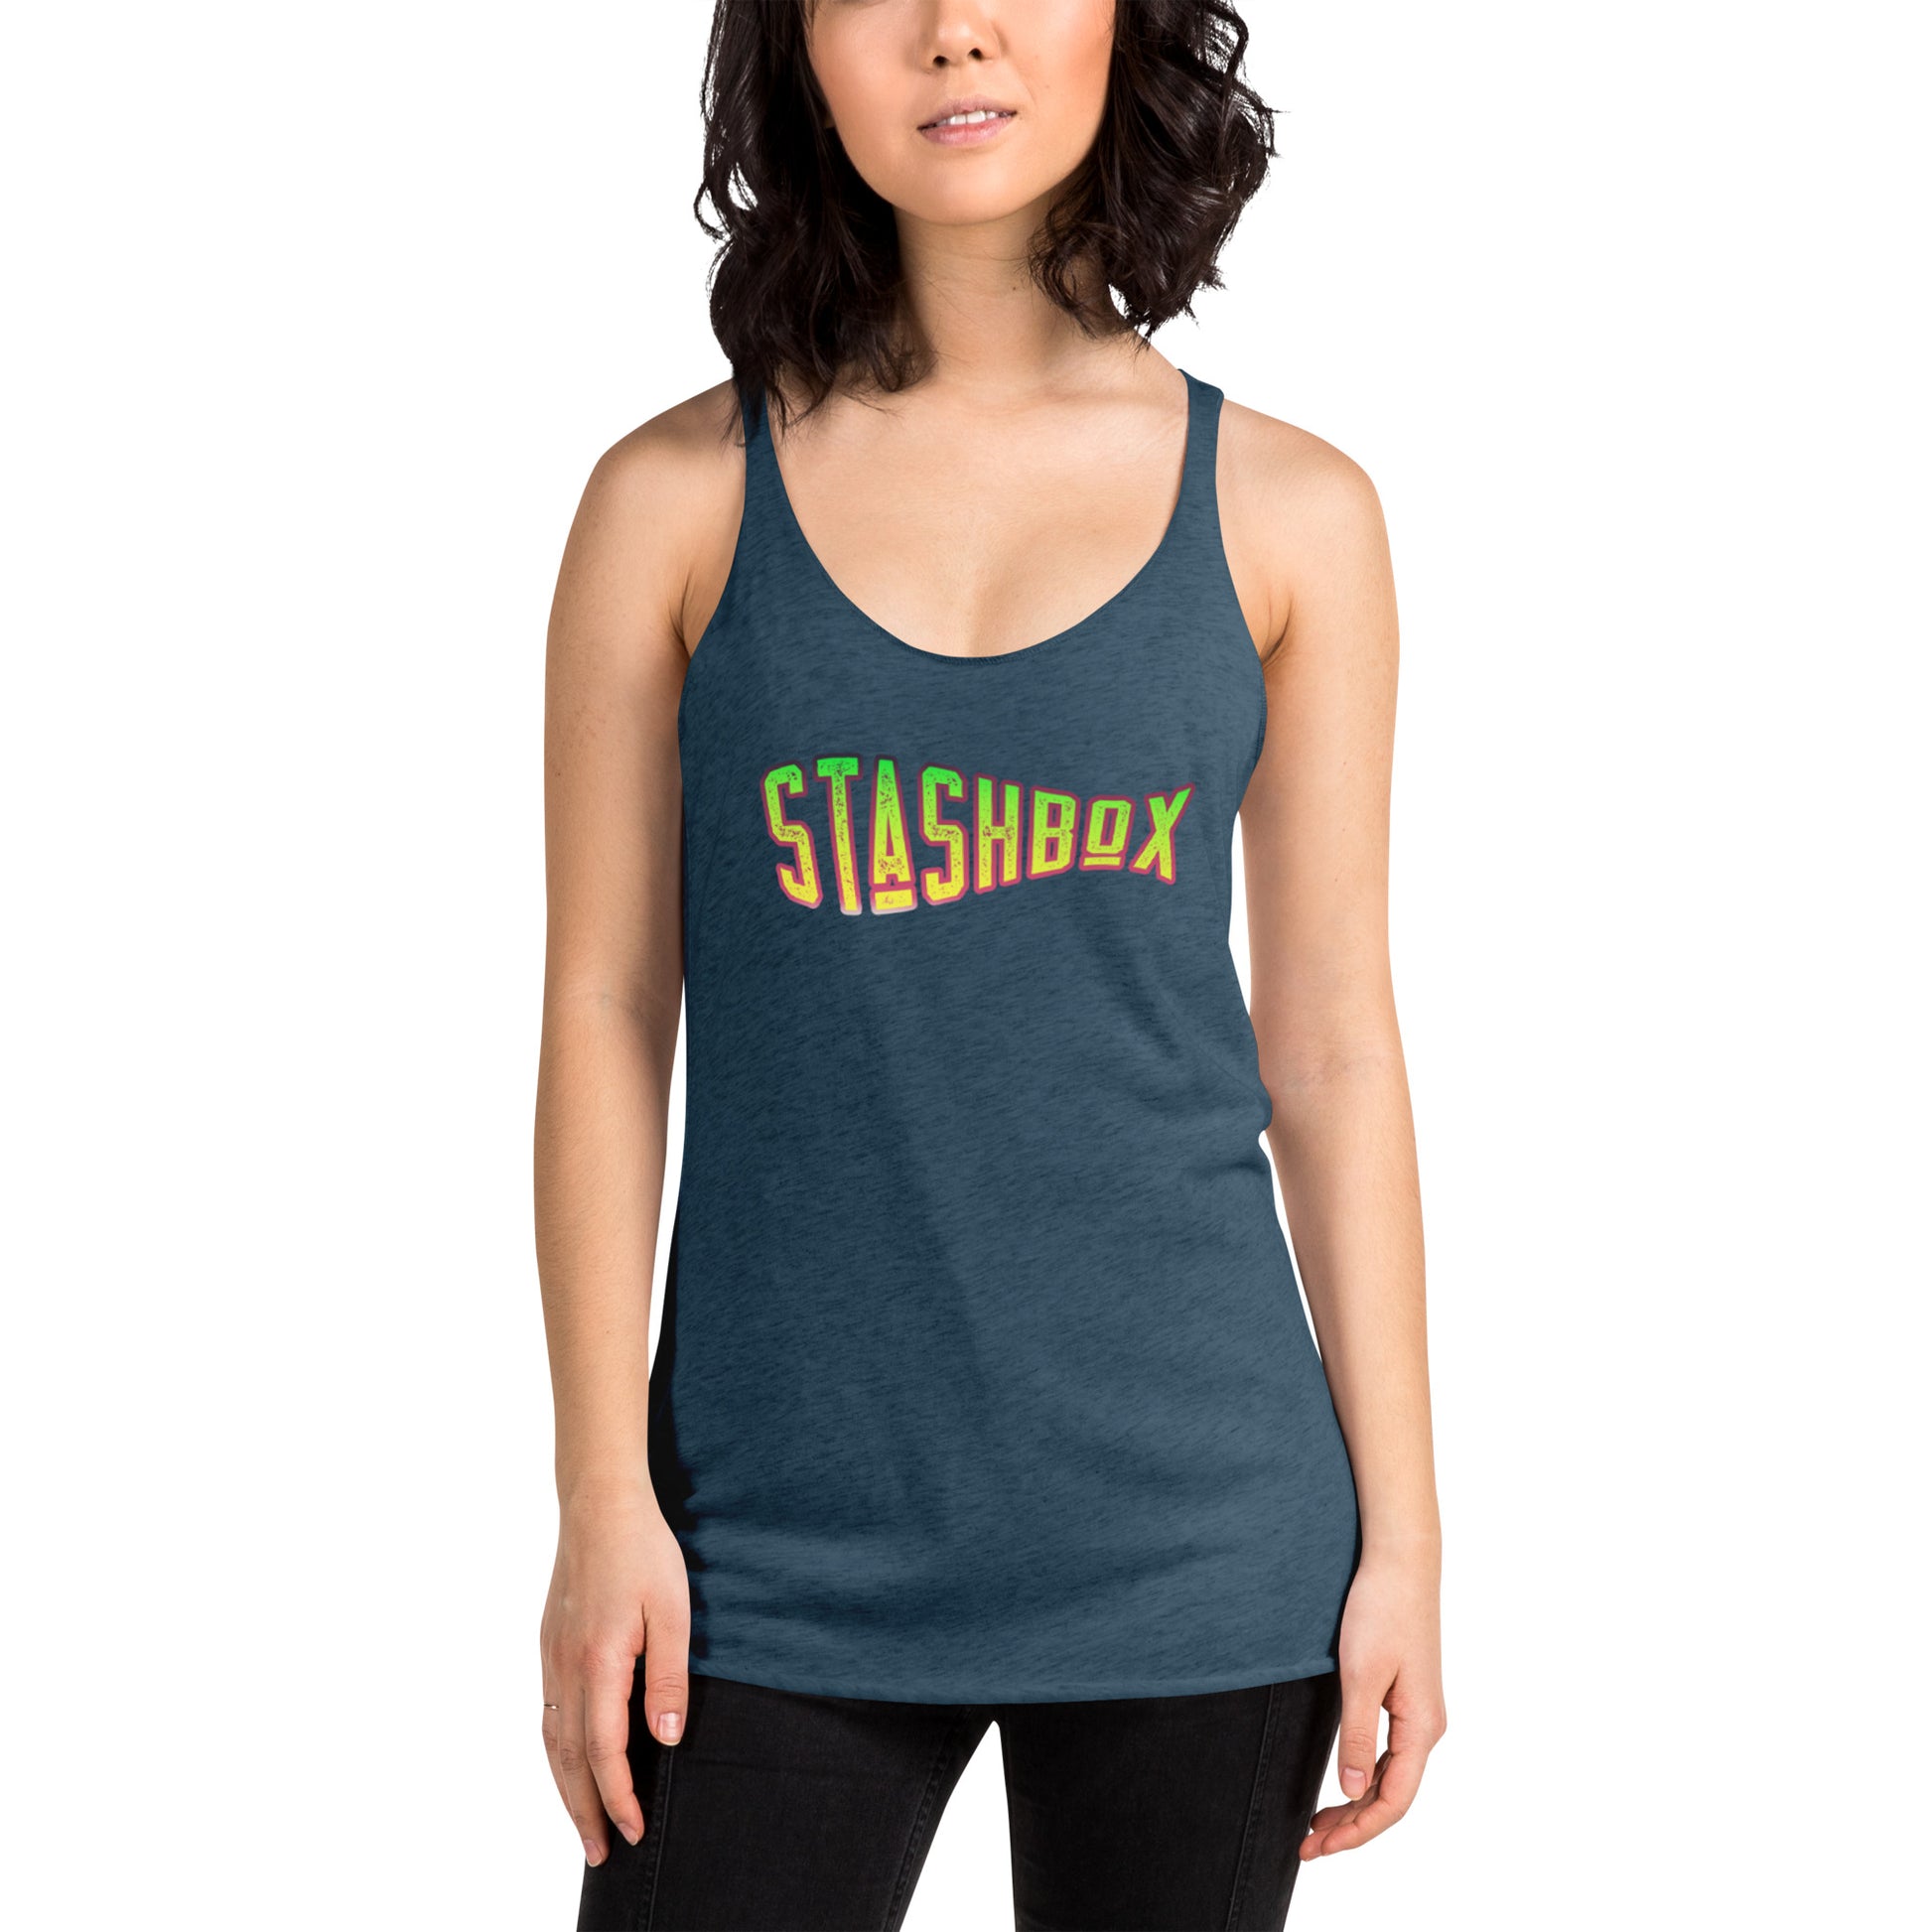 Dive into a world of chic fashion with our Women's Stashbox Racerback Tank Top Shirt, showcasing the unique design #011. Explore unparalleled style, exclusively crafted by Stashbox.